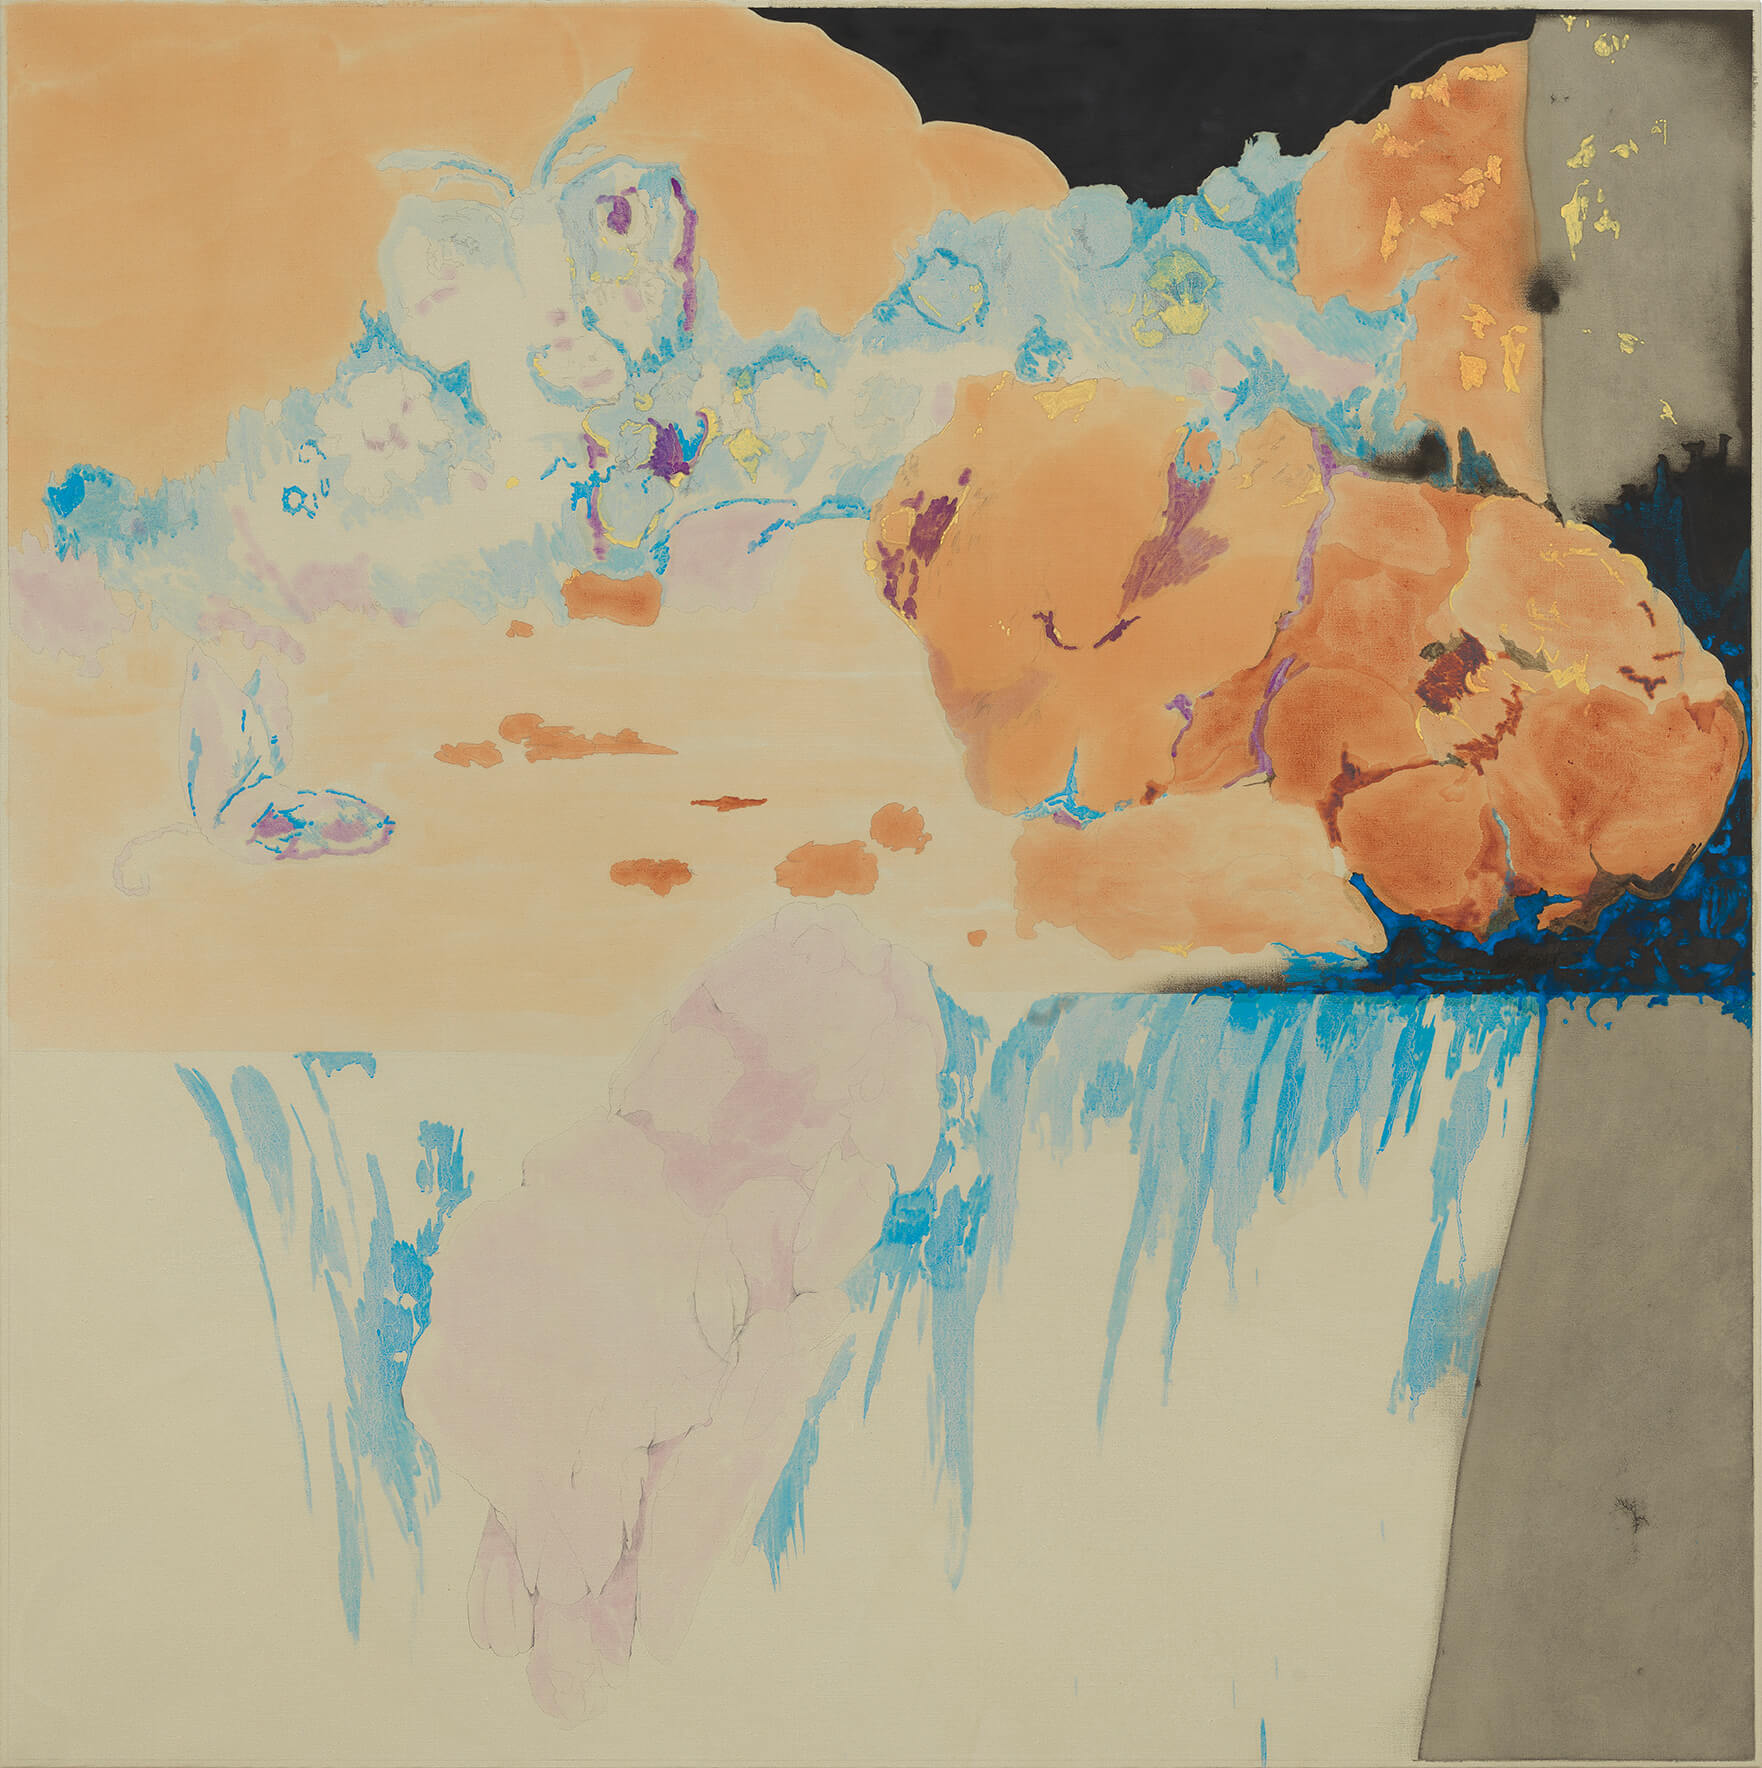 Dustin Hodges LEP_35, 2020 oil and graphite on linen 60 x 60 in. (152.4 x 152.4 cm.)